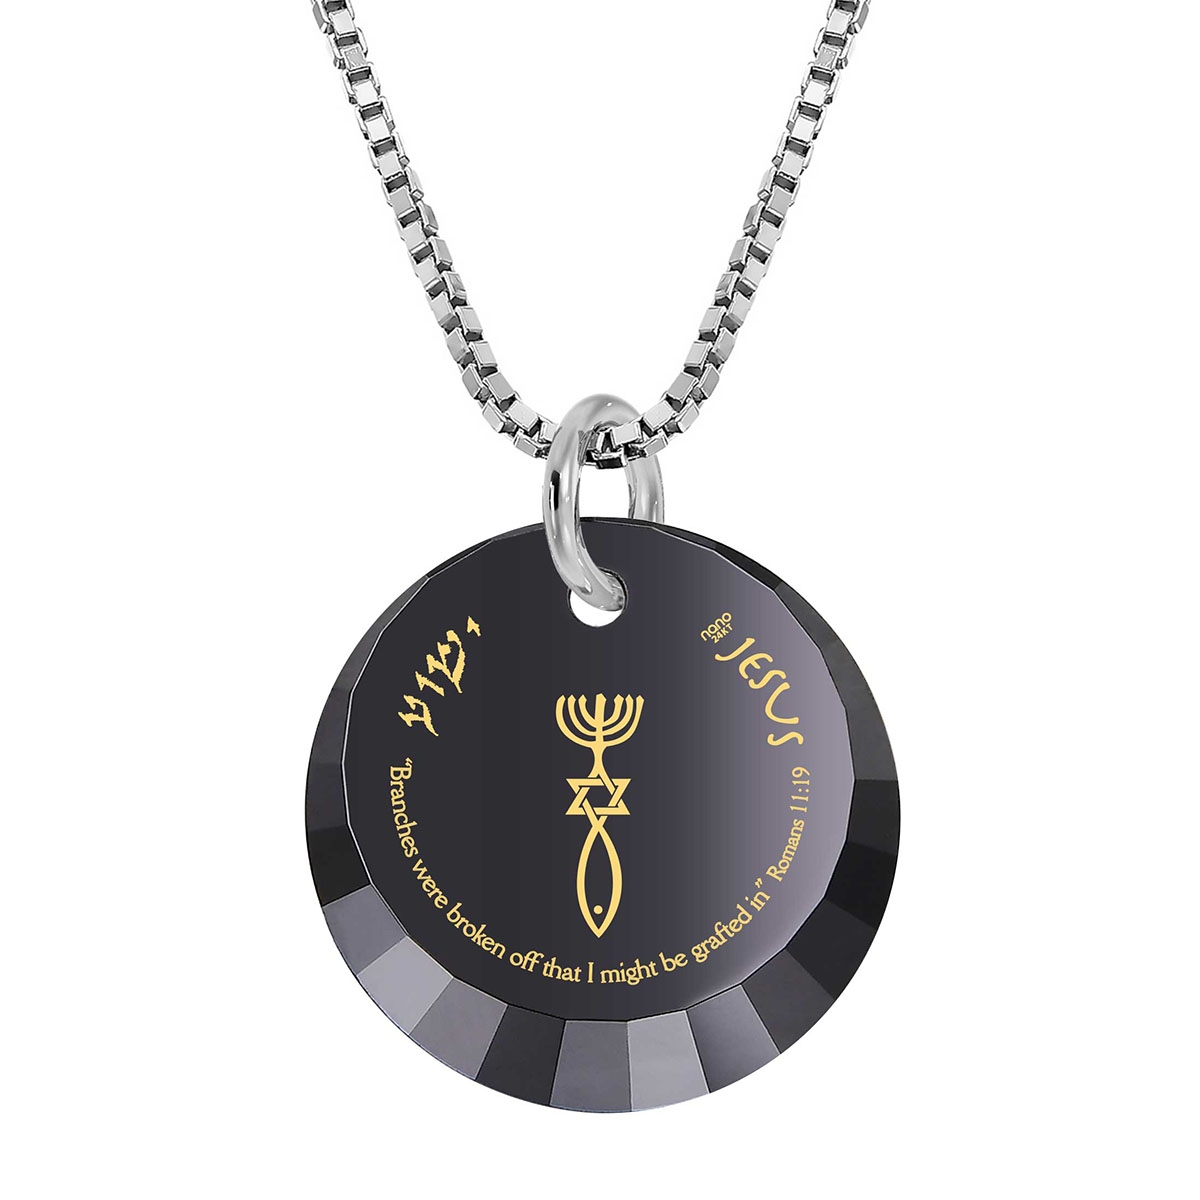 Nano Jewelry Sterling Silver & Gemstone Grafted-In Necklace with 24K Gold Micro-Inscription (Black) - 1